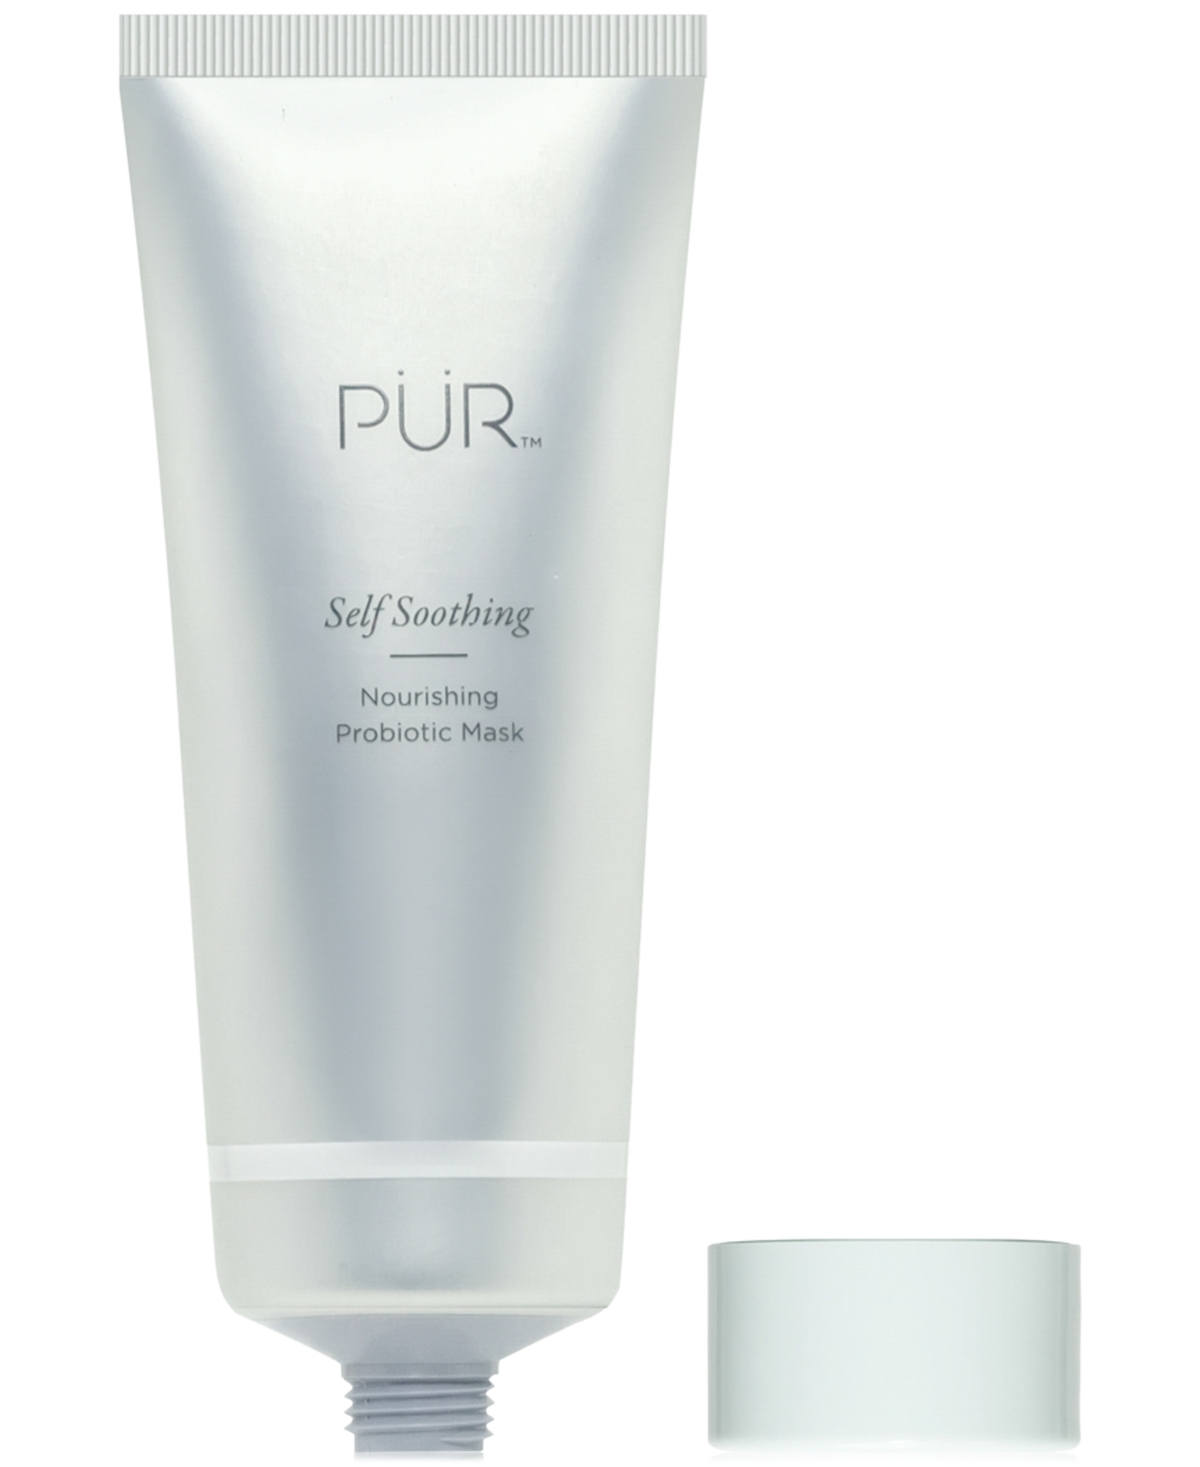 Pür Self Soothing Nourishing Probiotic Mask, 2.5 Oz. In No Color